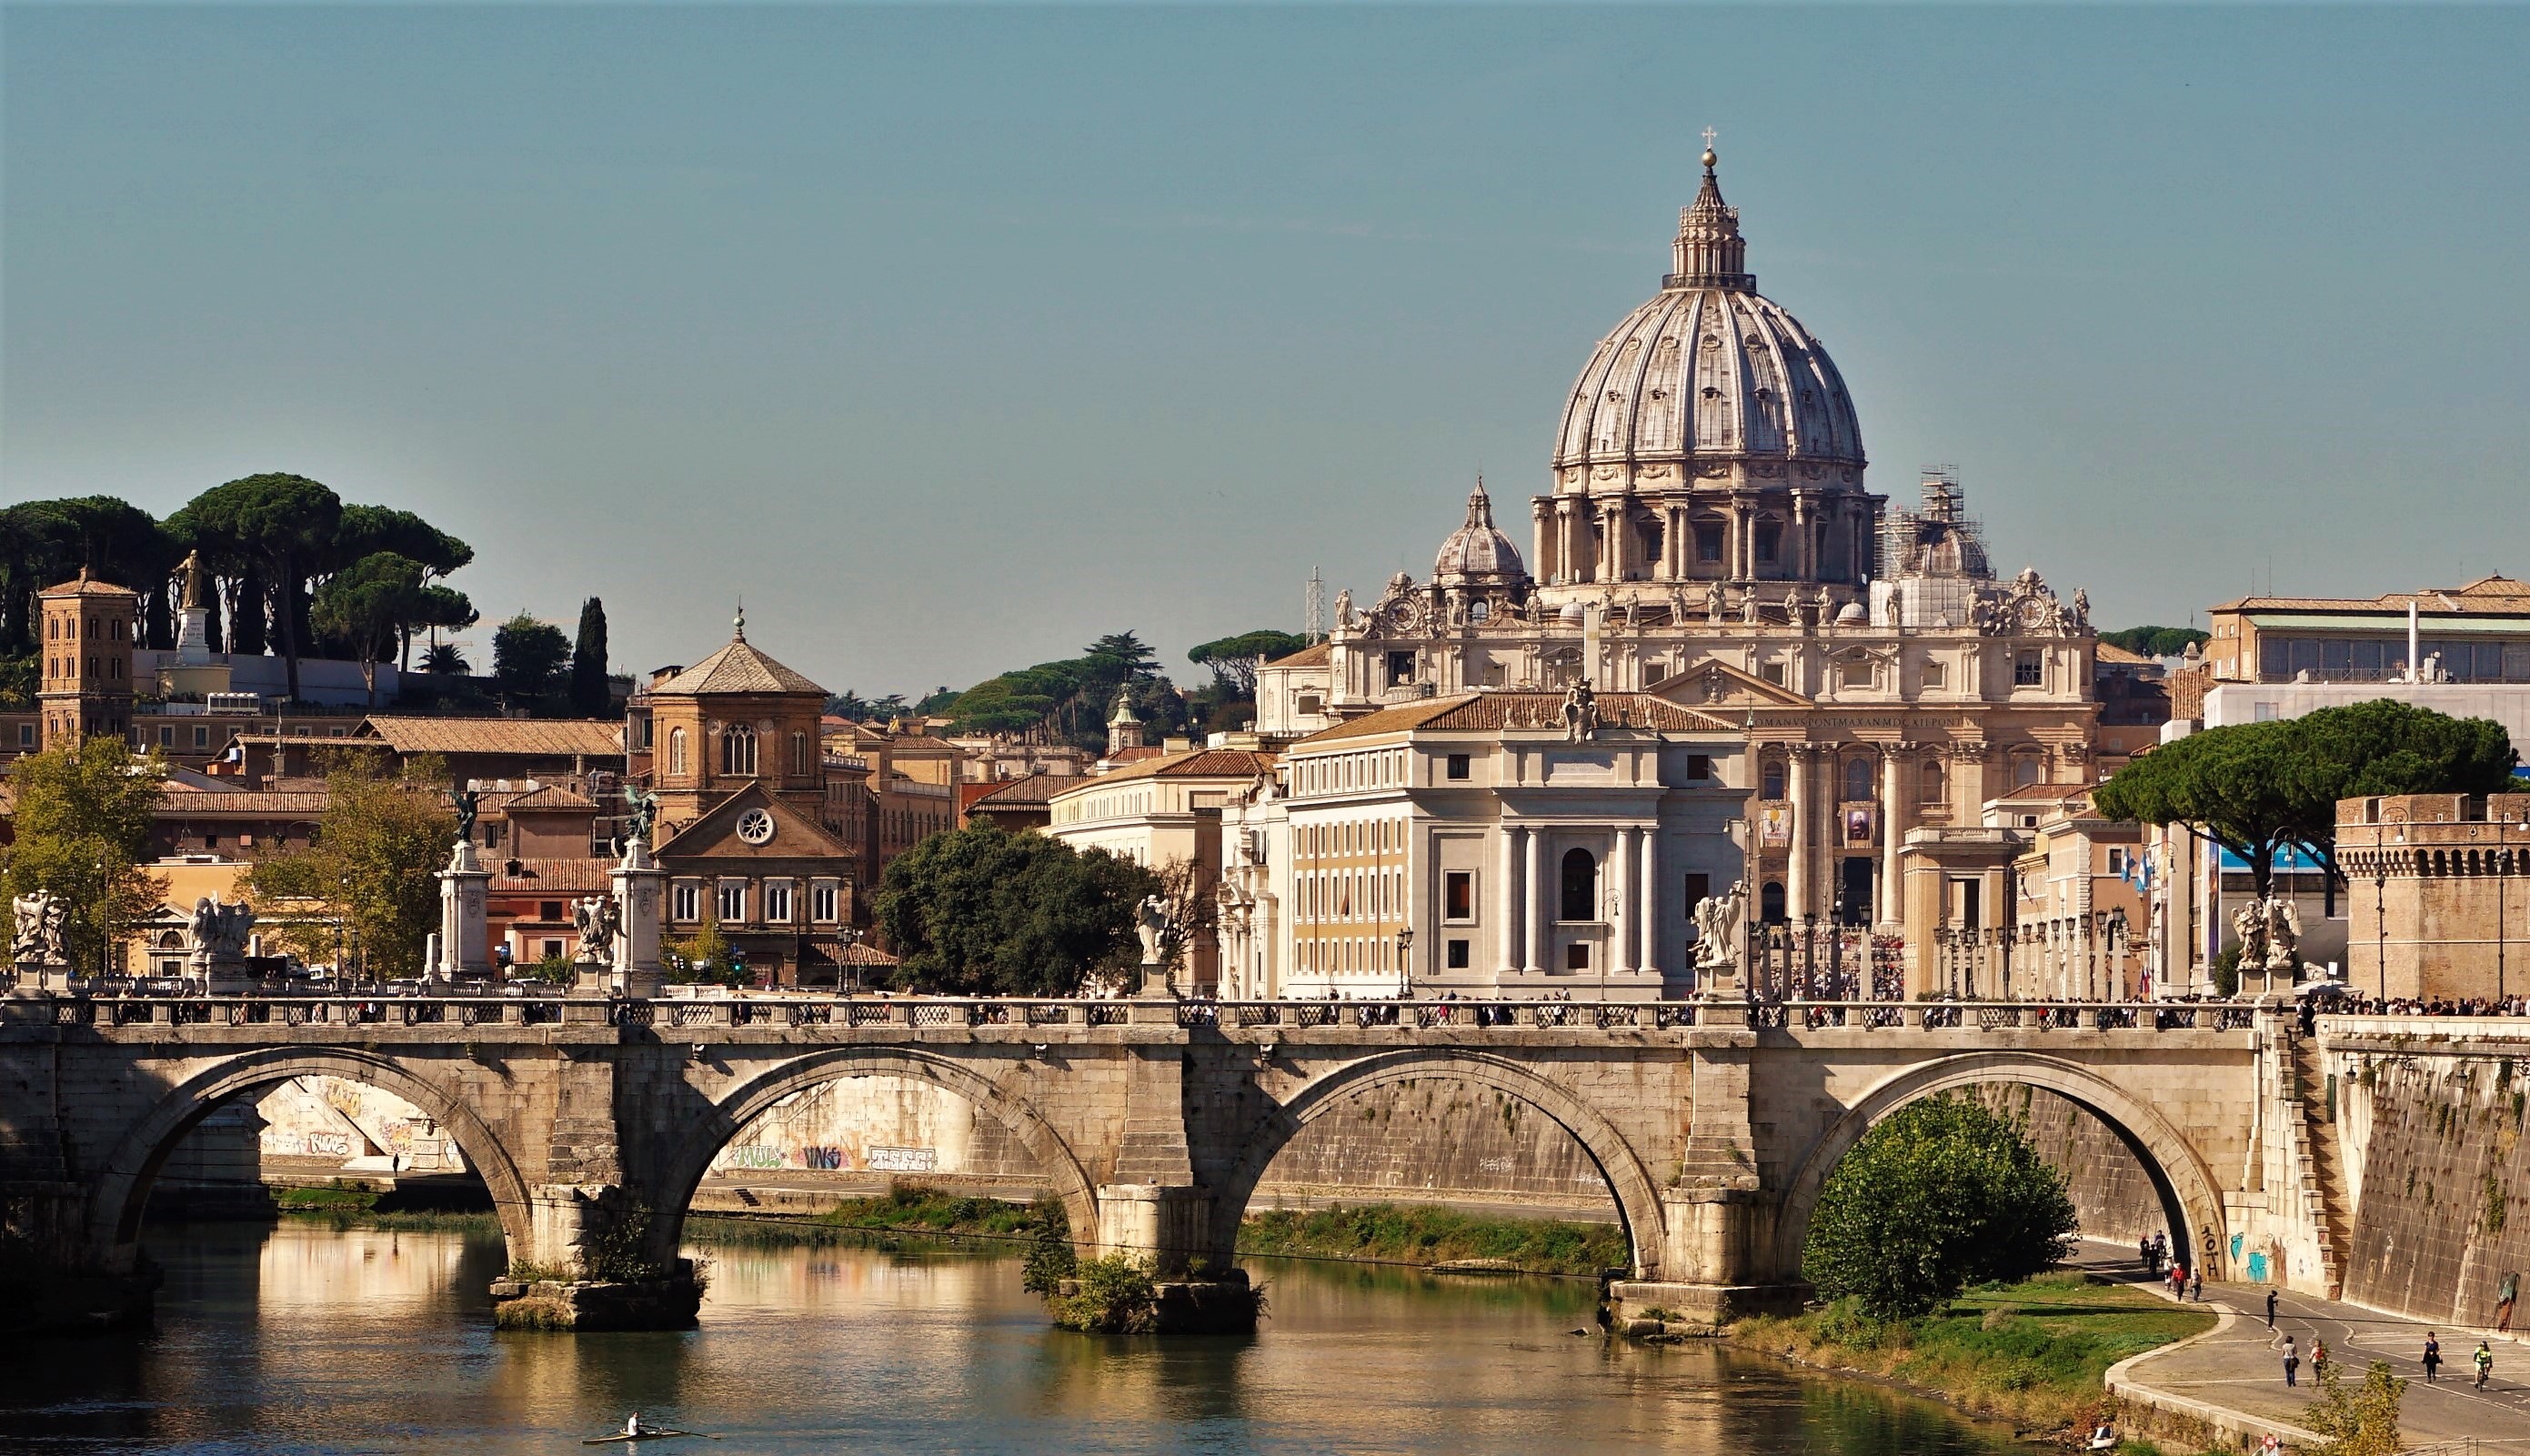 St. Peter's Basilica Dome Tour In Vatican City, Italy